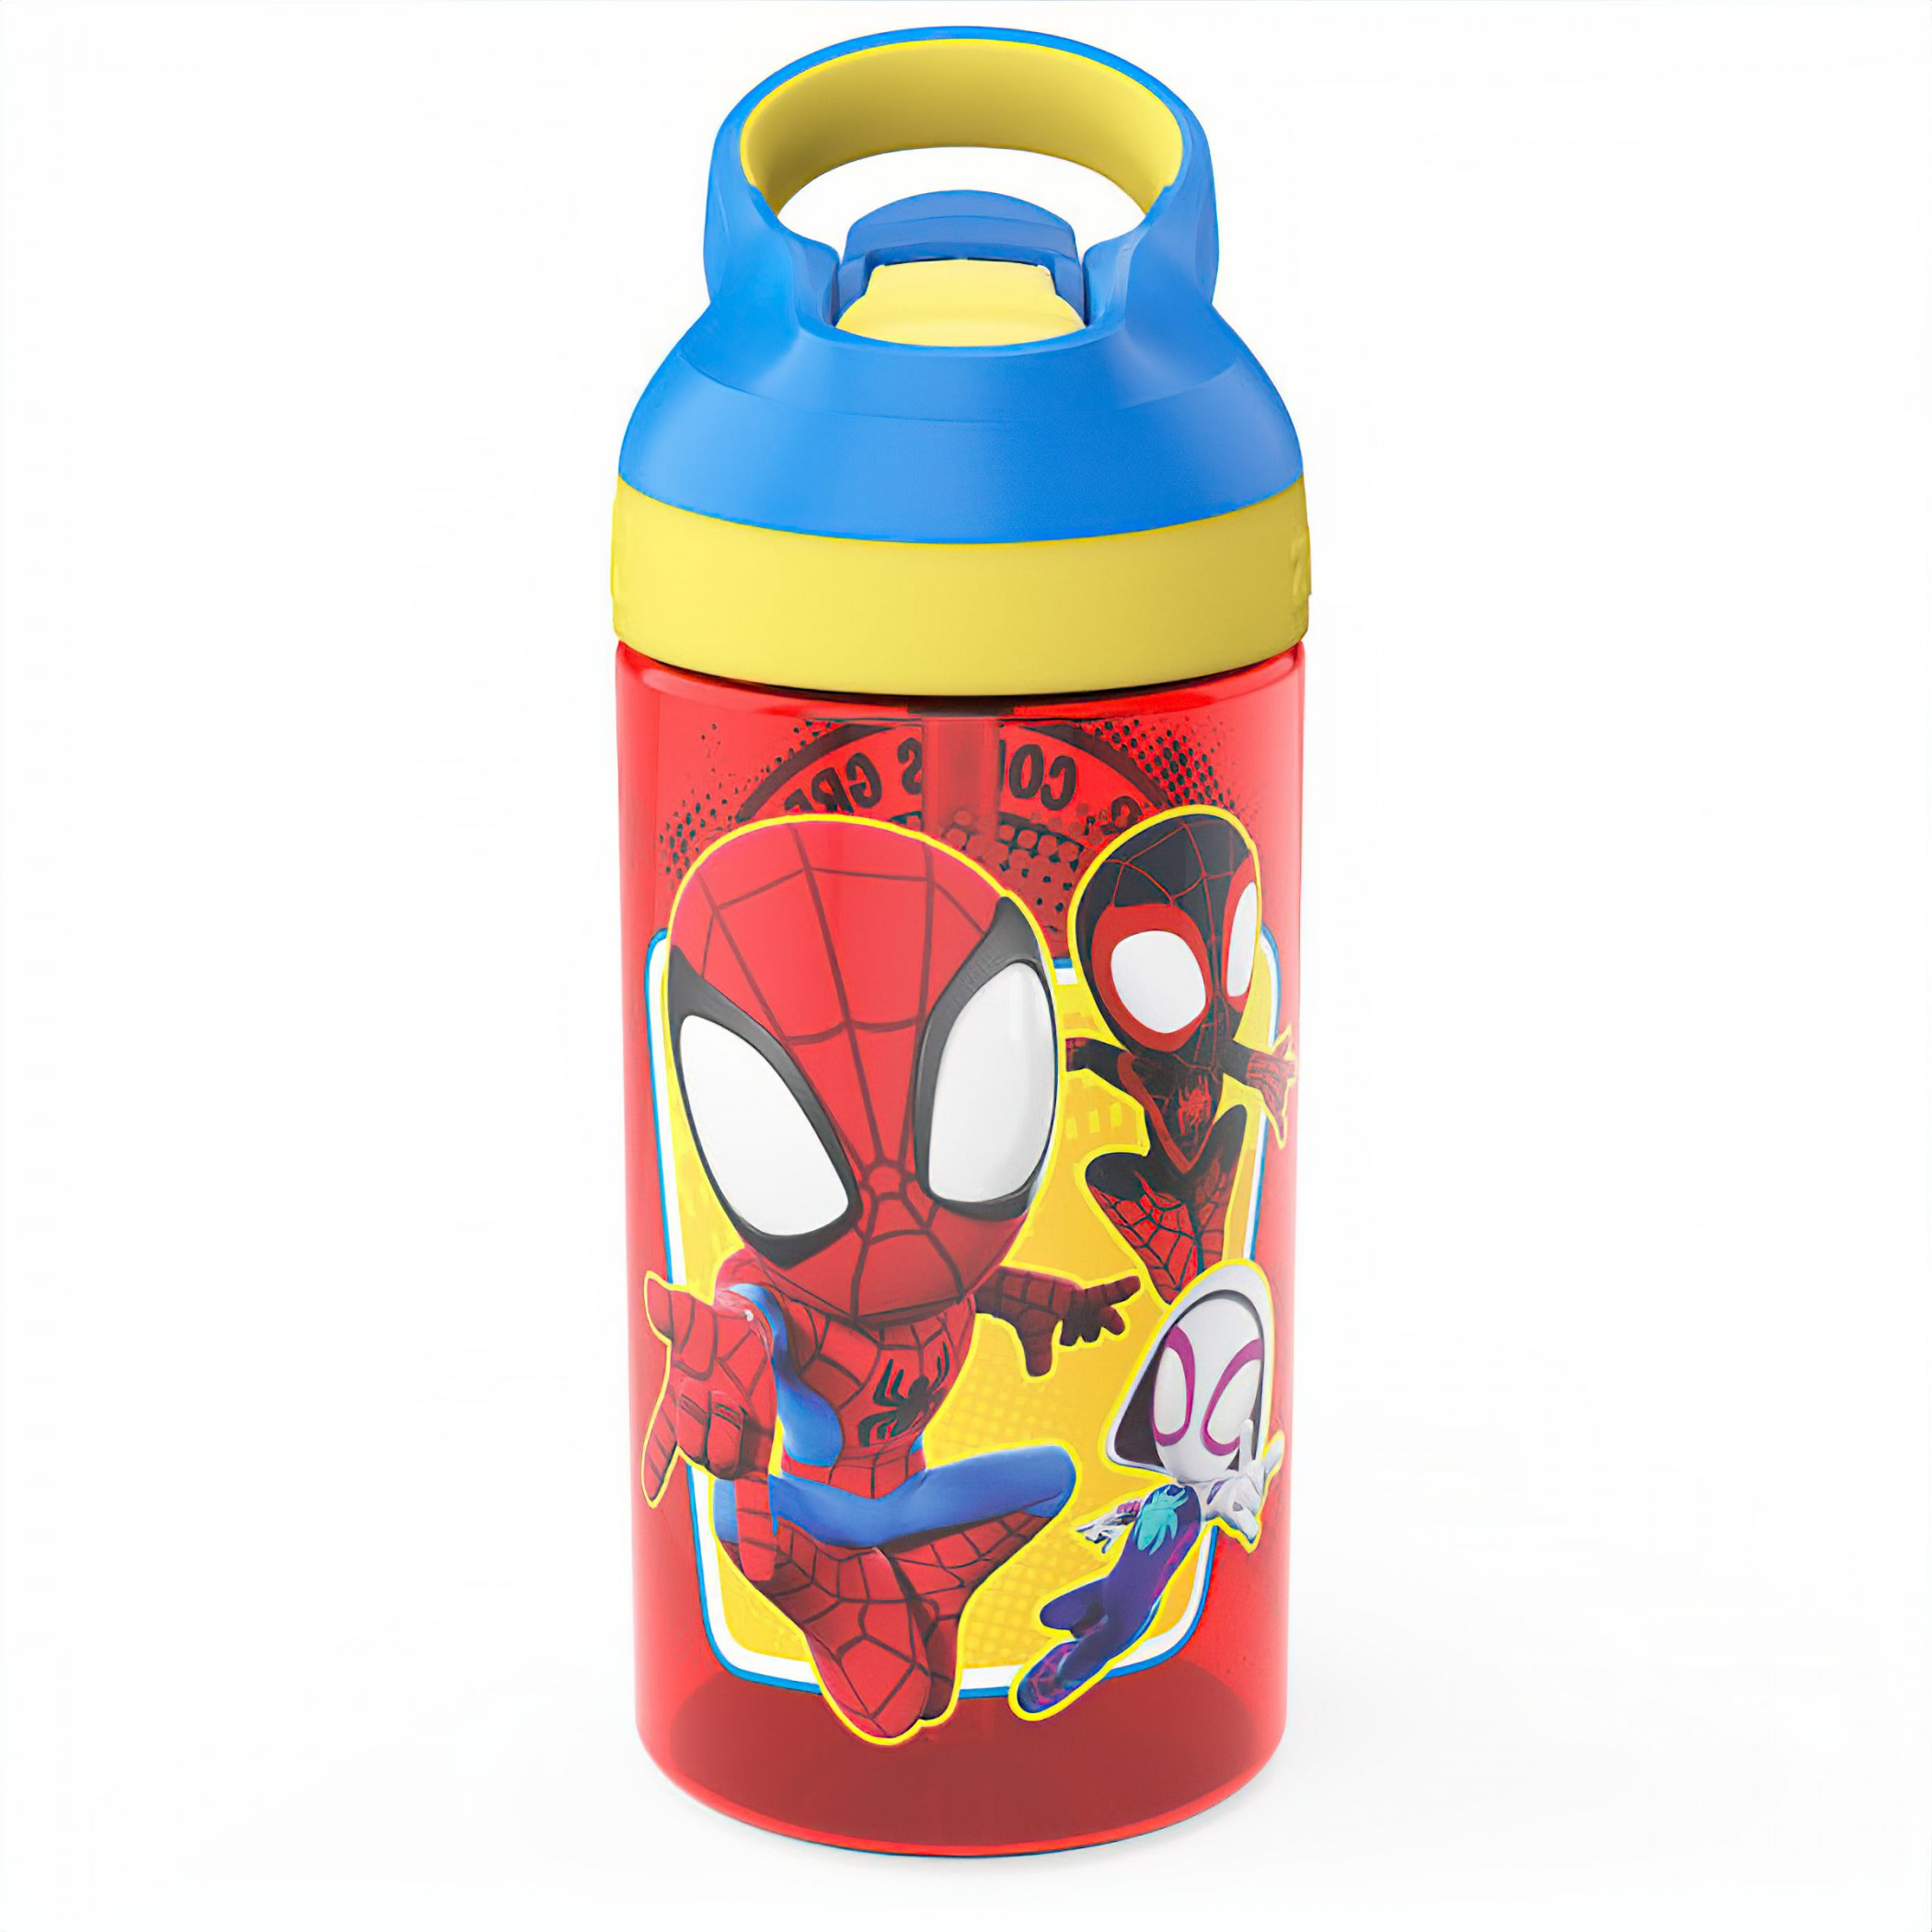 Spider-Man and His Amazing Friends 16oz Reusable Plastic Water Bottle